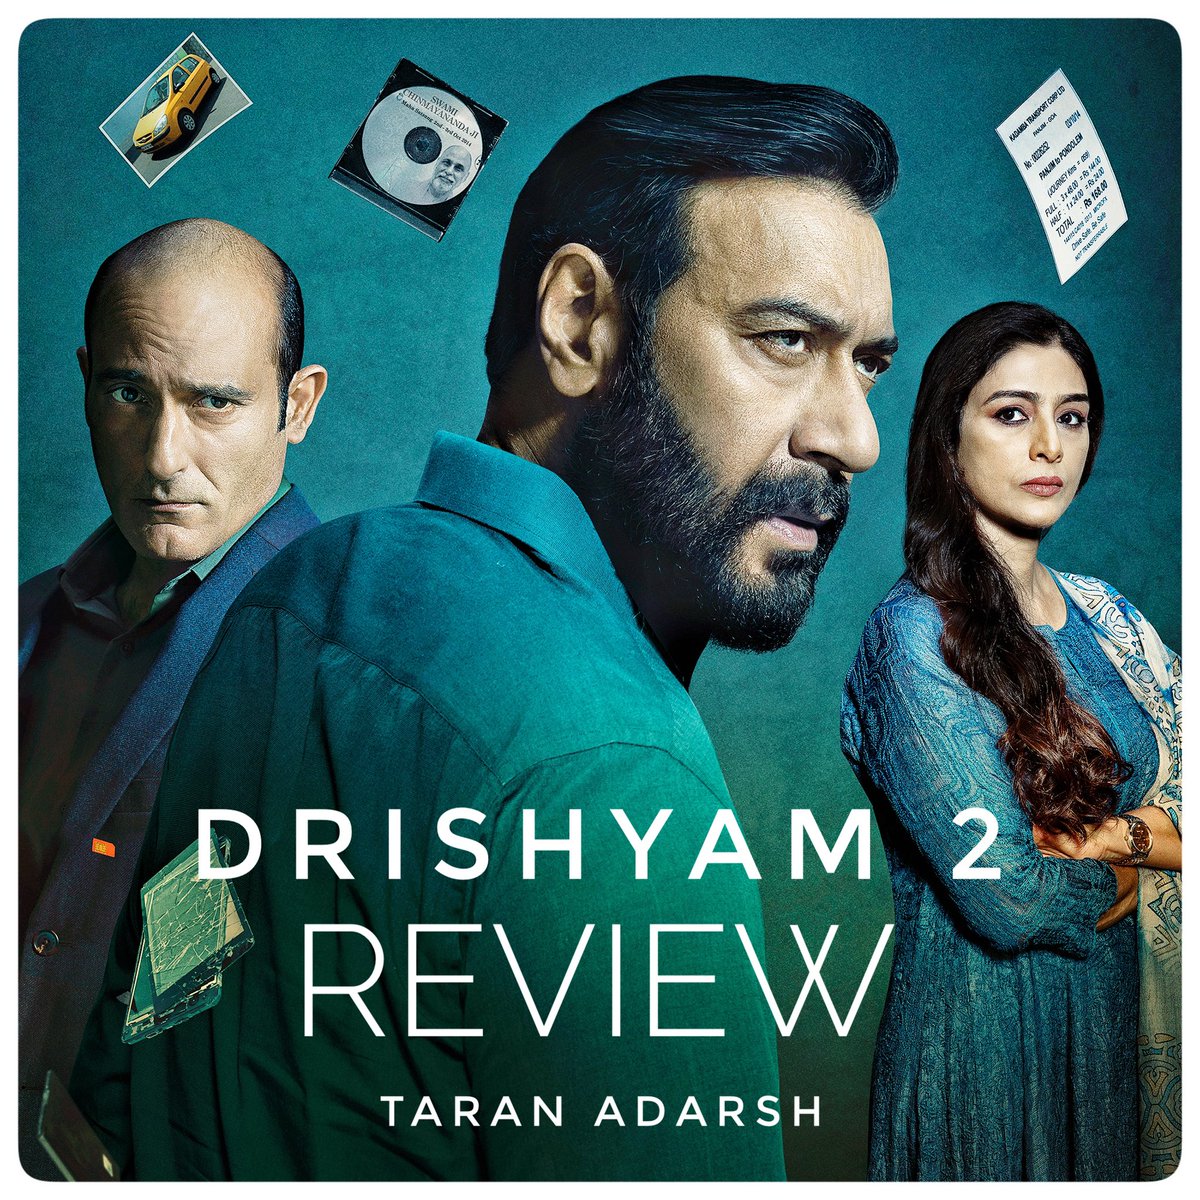 #OneWordReview...
#Drishyam2: POWER-PACKED.
Rating: ⭐⭐⭐⭐️
#AjayDevgn. #AkshayeKhanna. #Tabu. #ShriyaSaran… Powerhouse actors in a power-packed film… Director #AbhishekPathak delivers a fantastic thriller… The fiery confrontations cast a spell… DON’T MISS. #Drishyam2Review